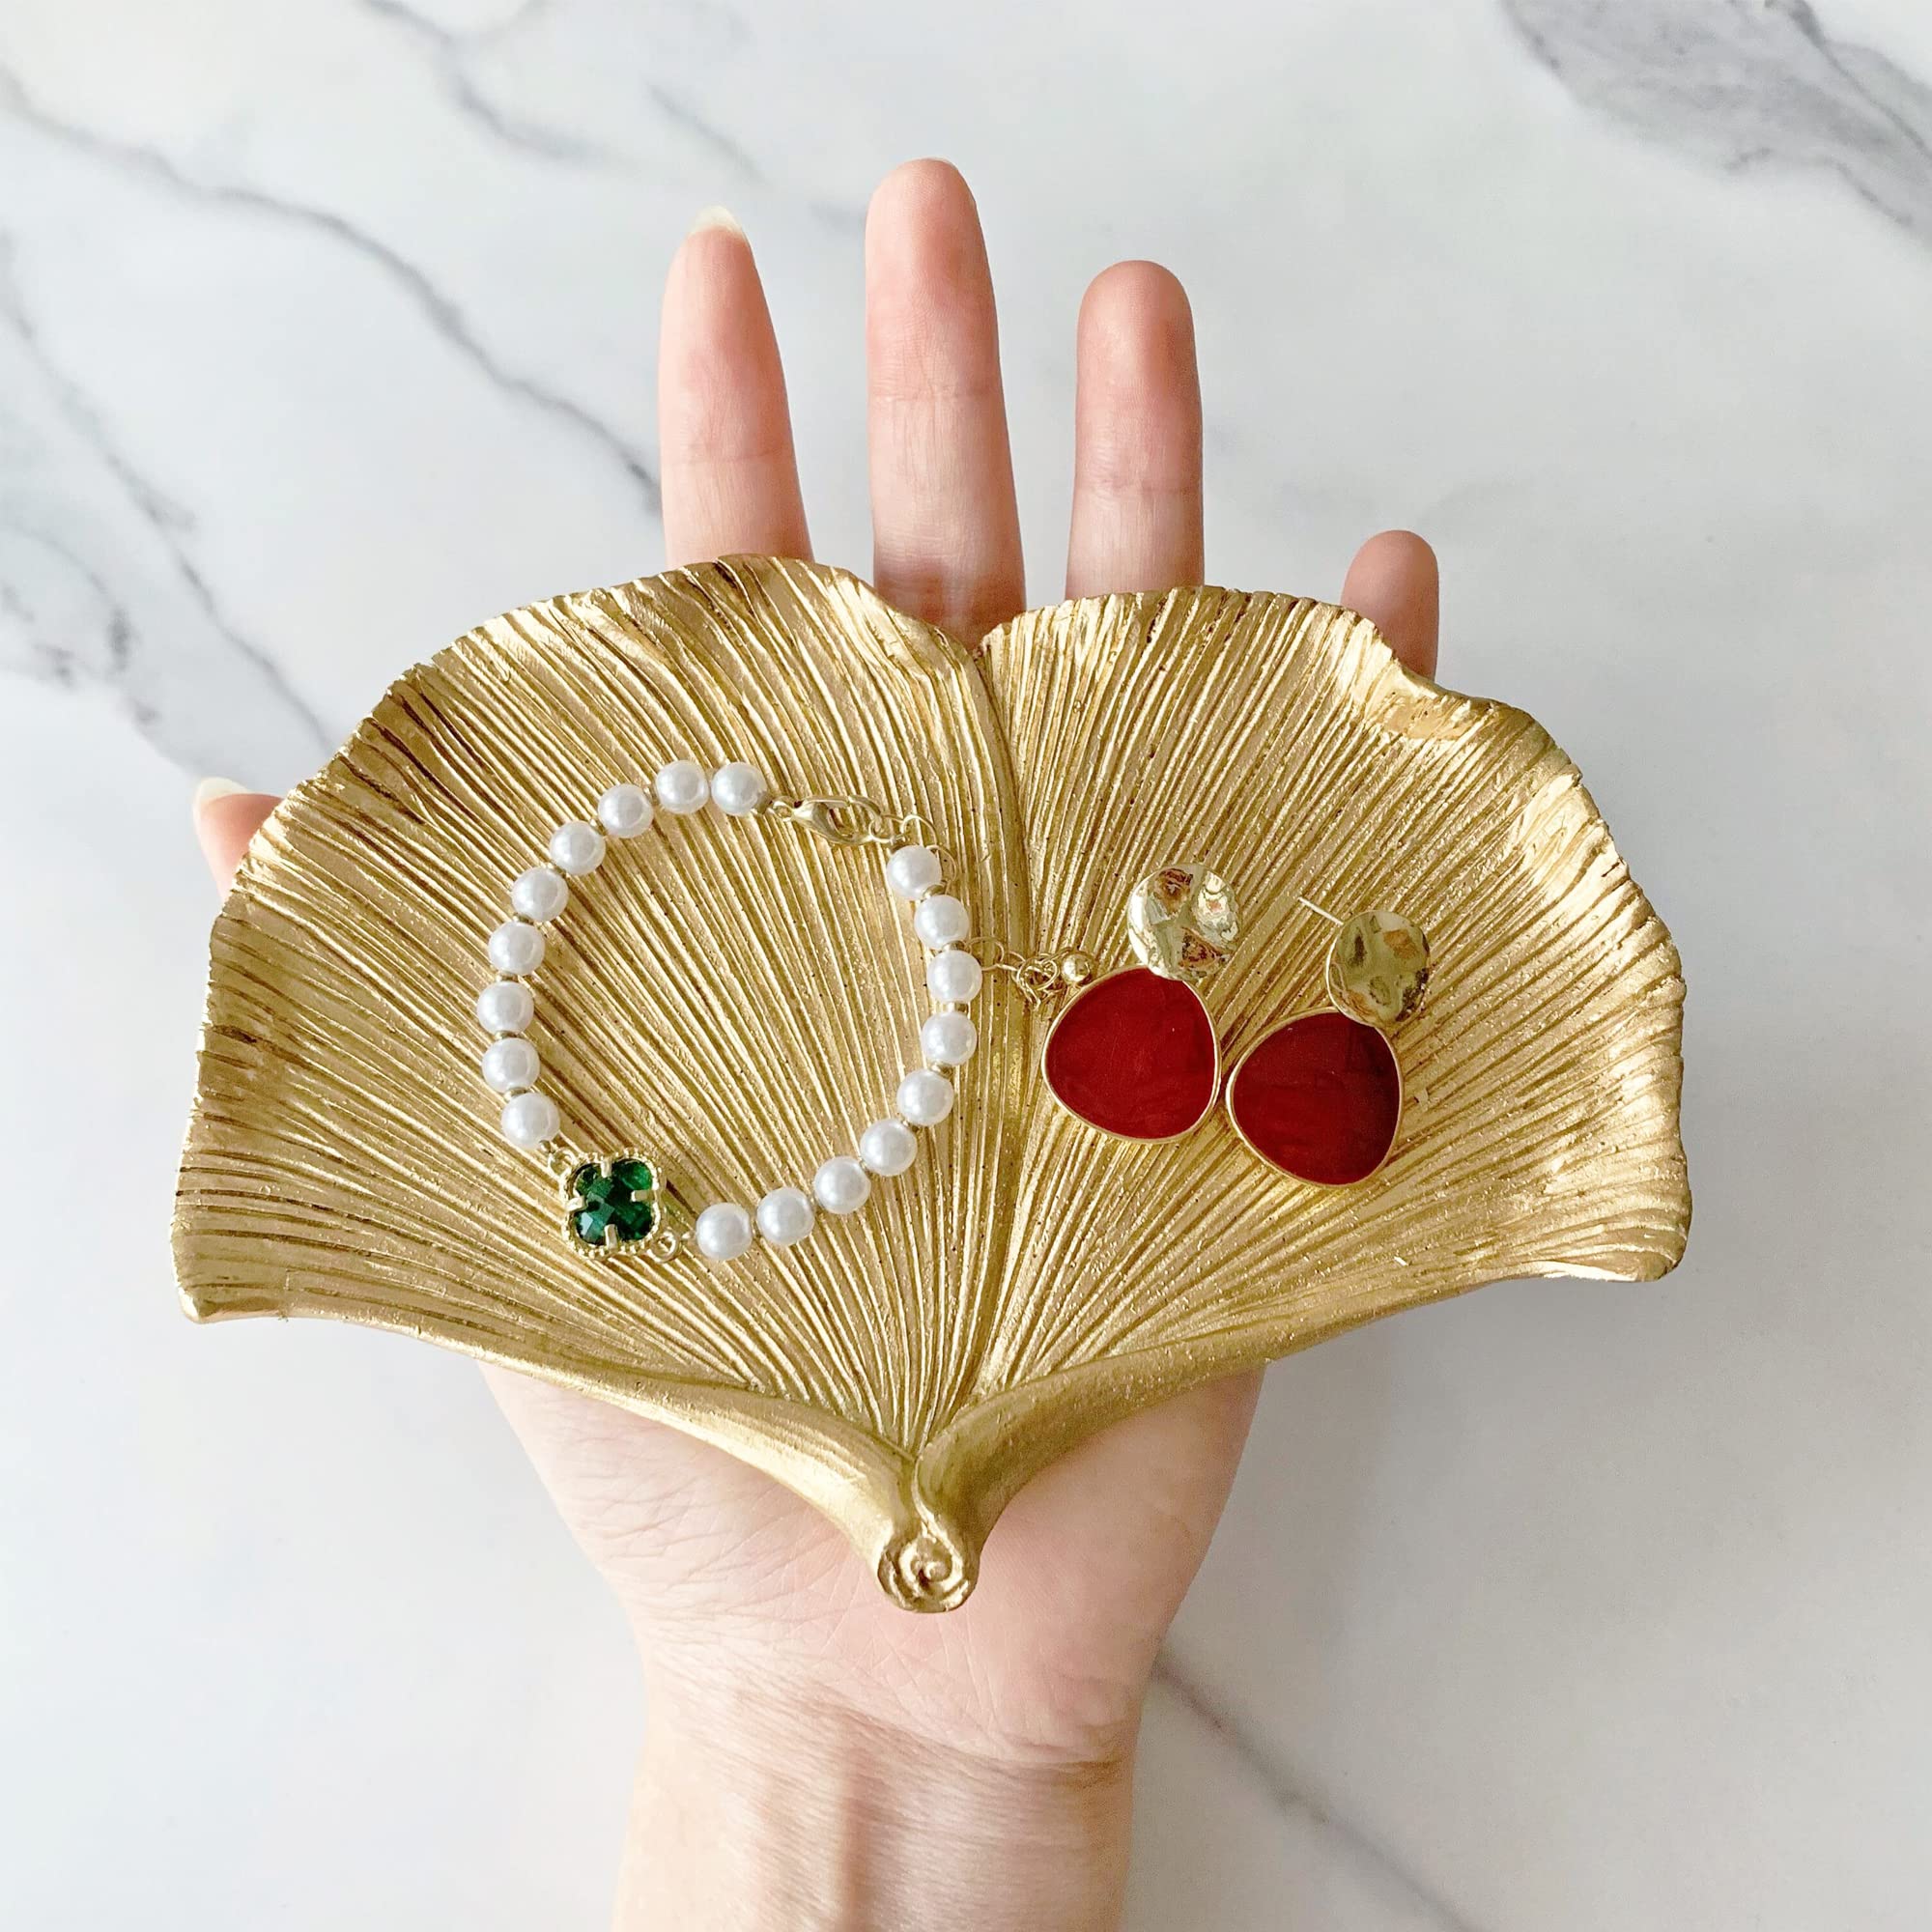 Jewelry Dish, Resin Small Leaf Shaped Ring Holder Jewelry Organizer, Trinket Dish Mini Tray for Christmas Birthday Wedding Gifts